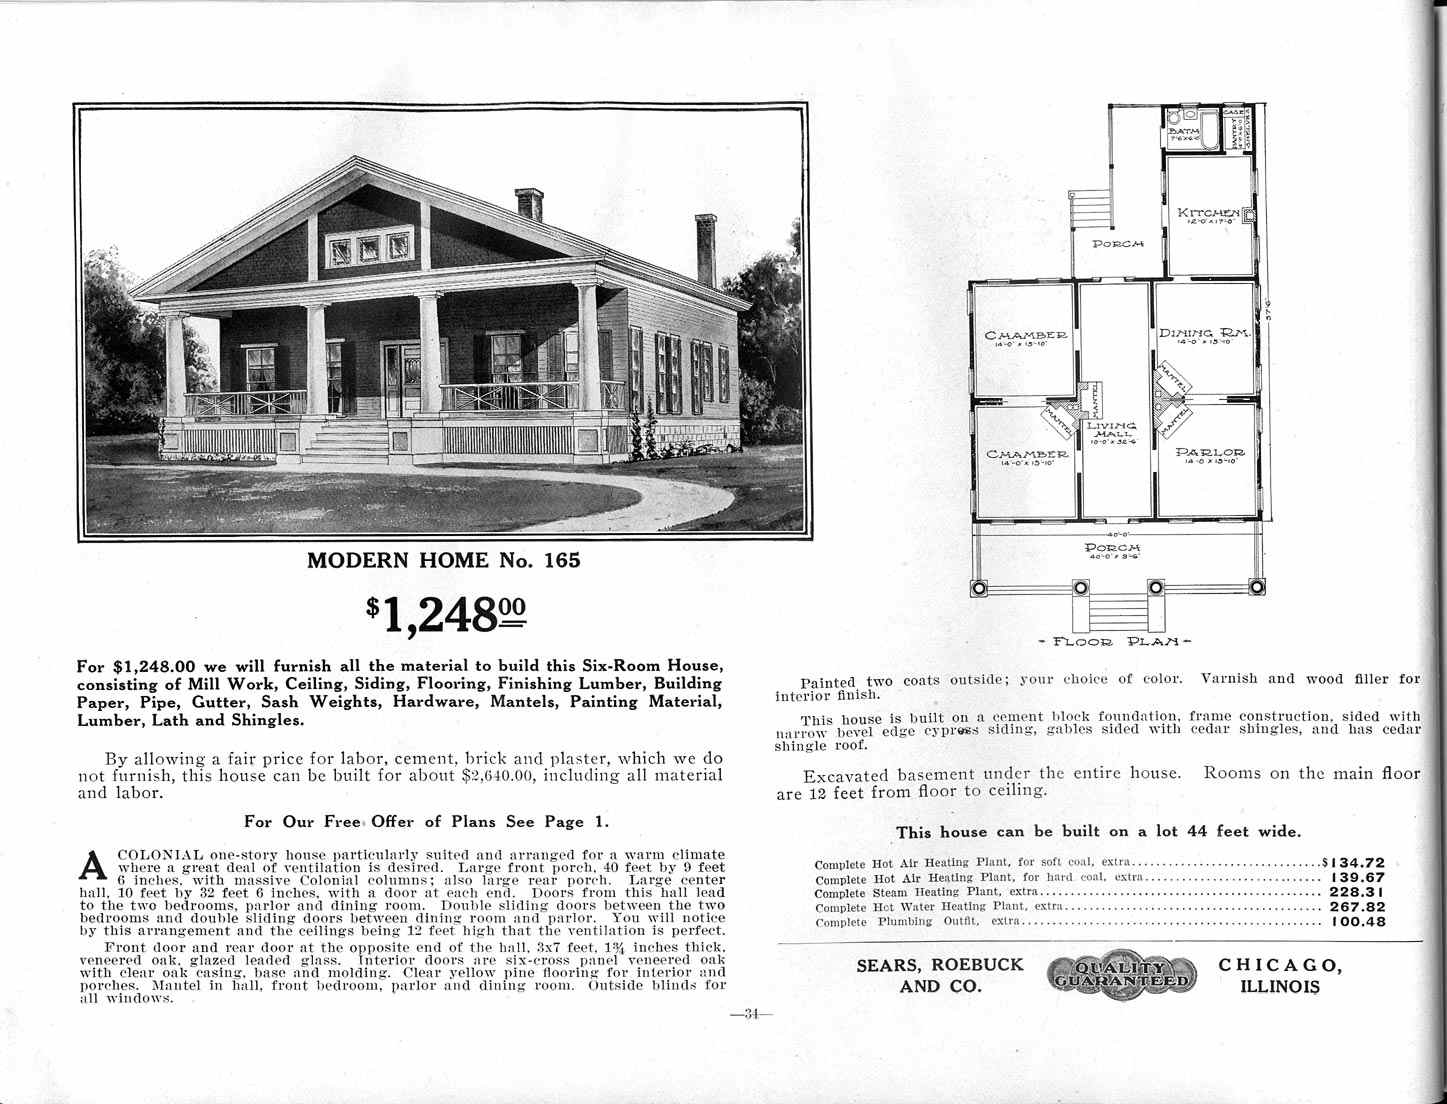 What are some historical house plans of Sears homes?